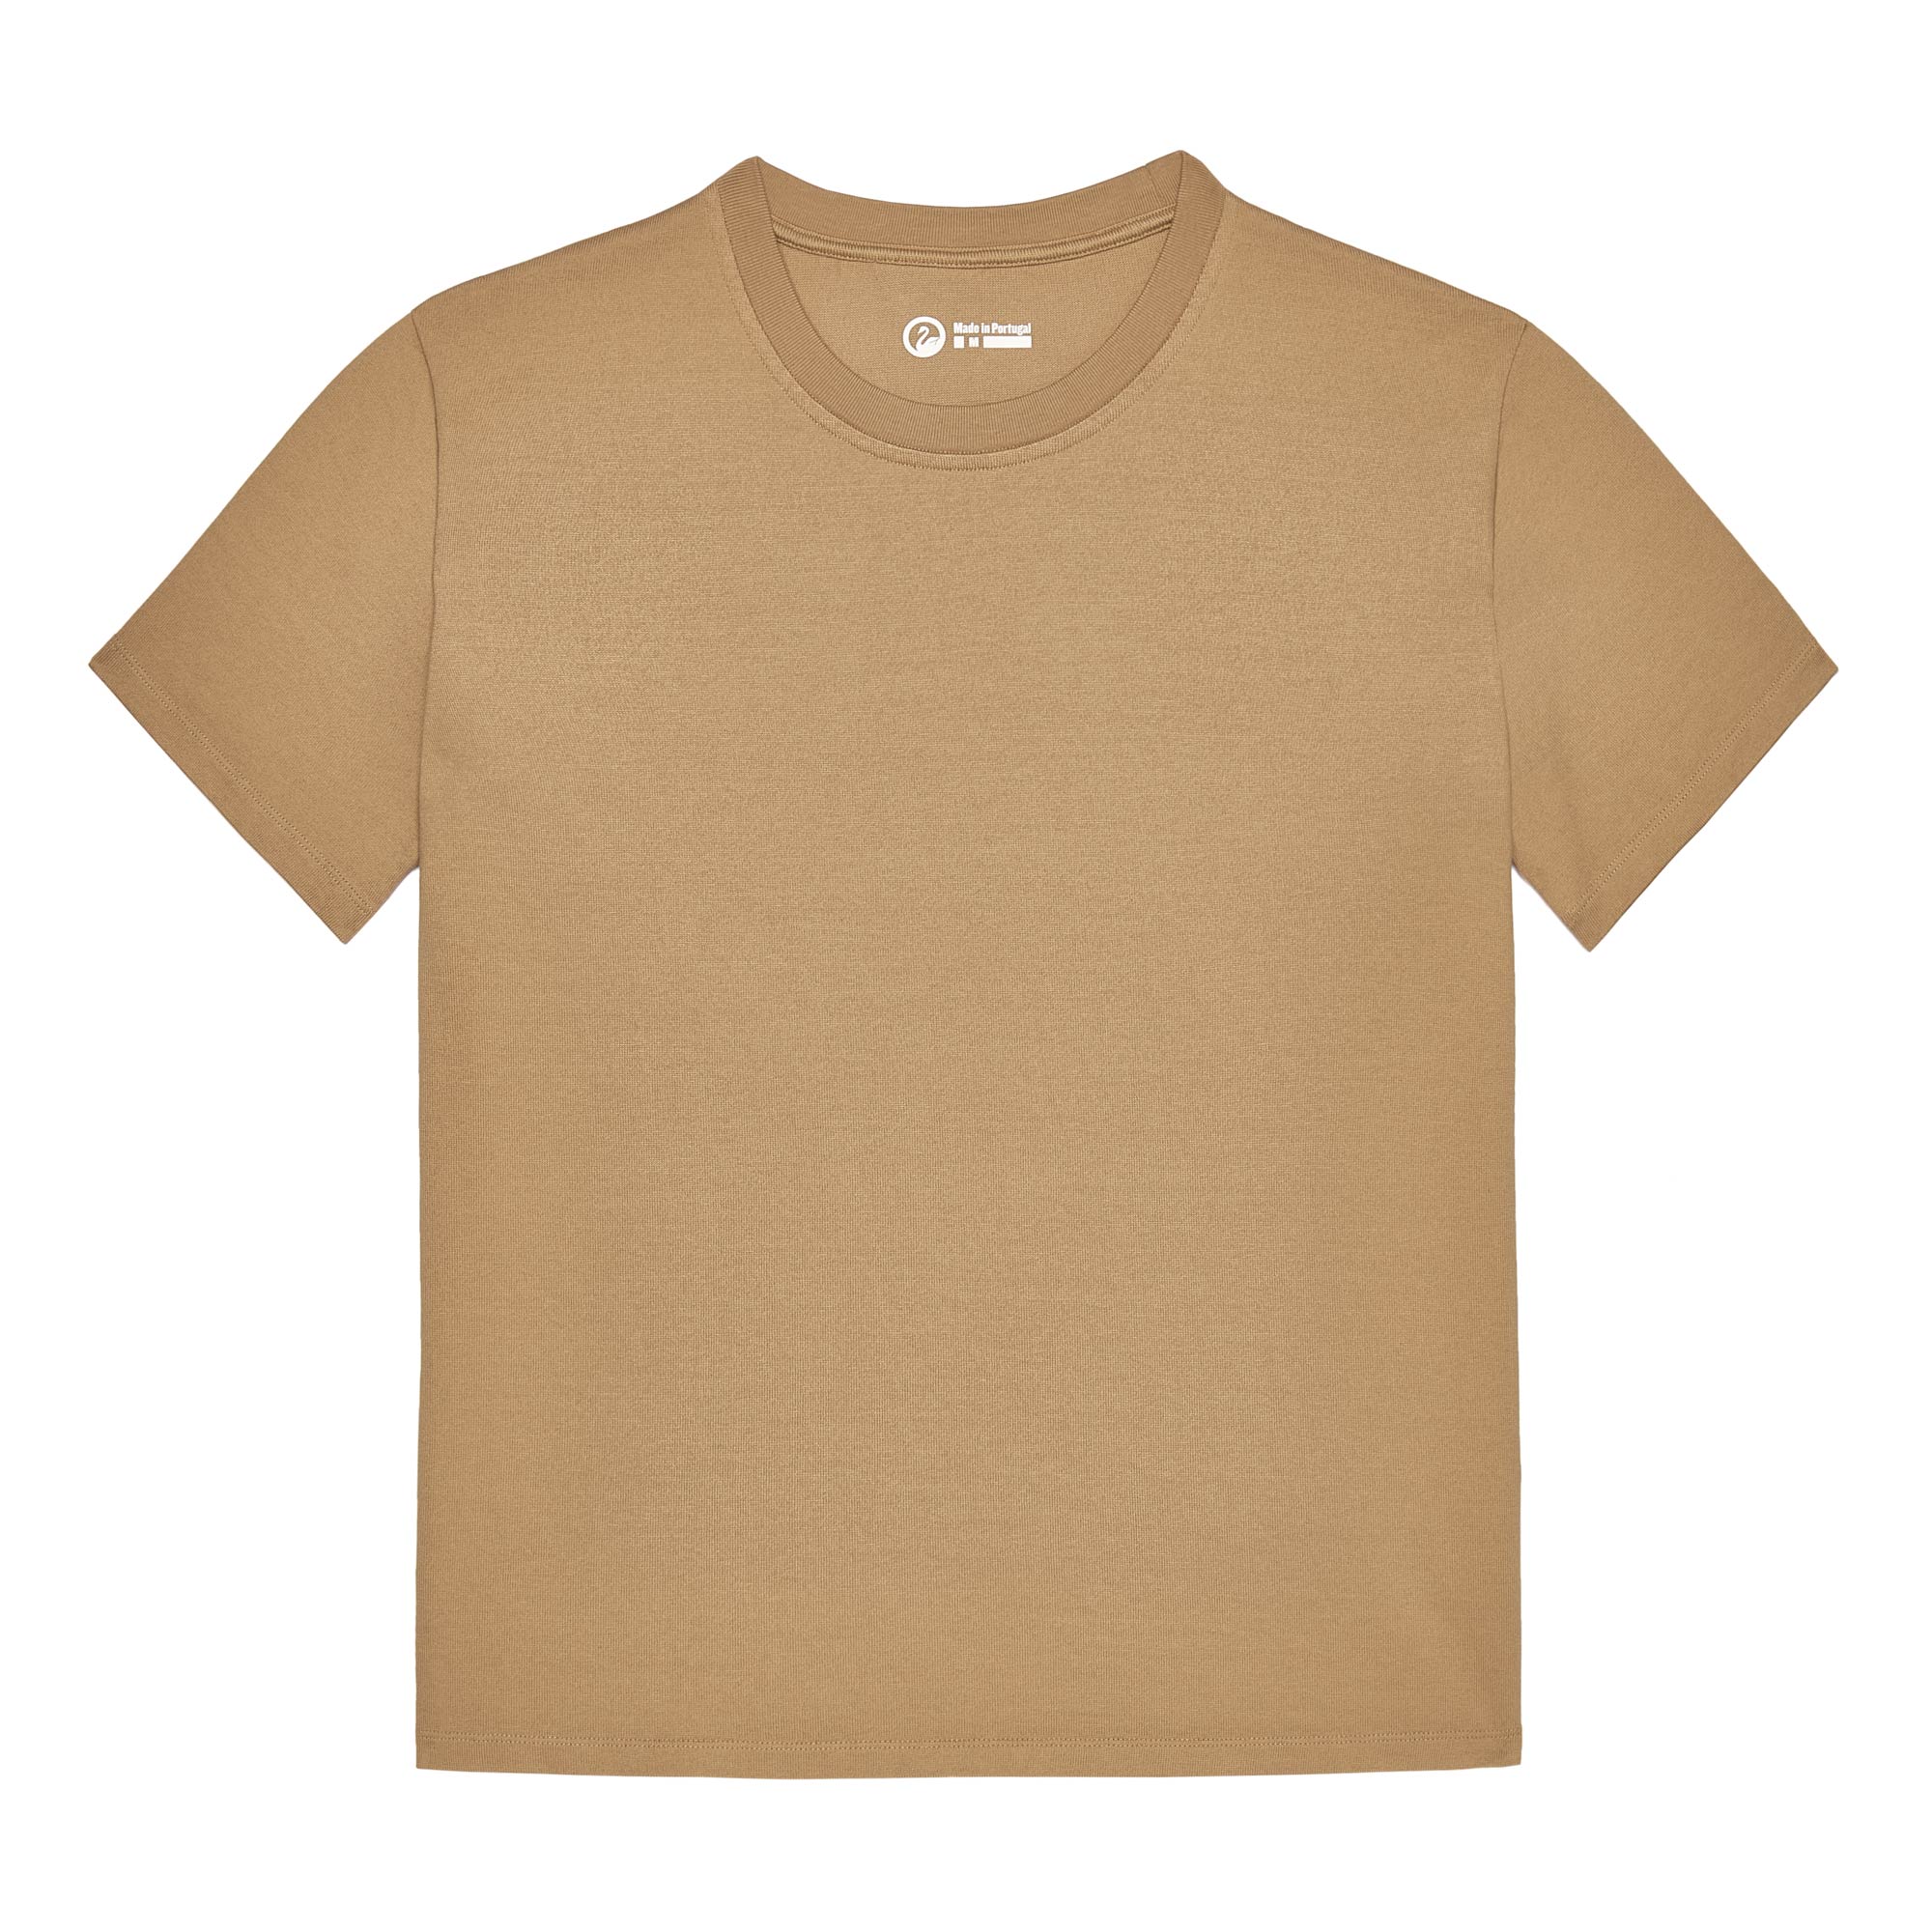 New Earth Cotton Cut One T-Shirt